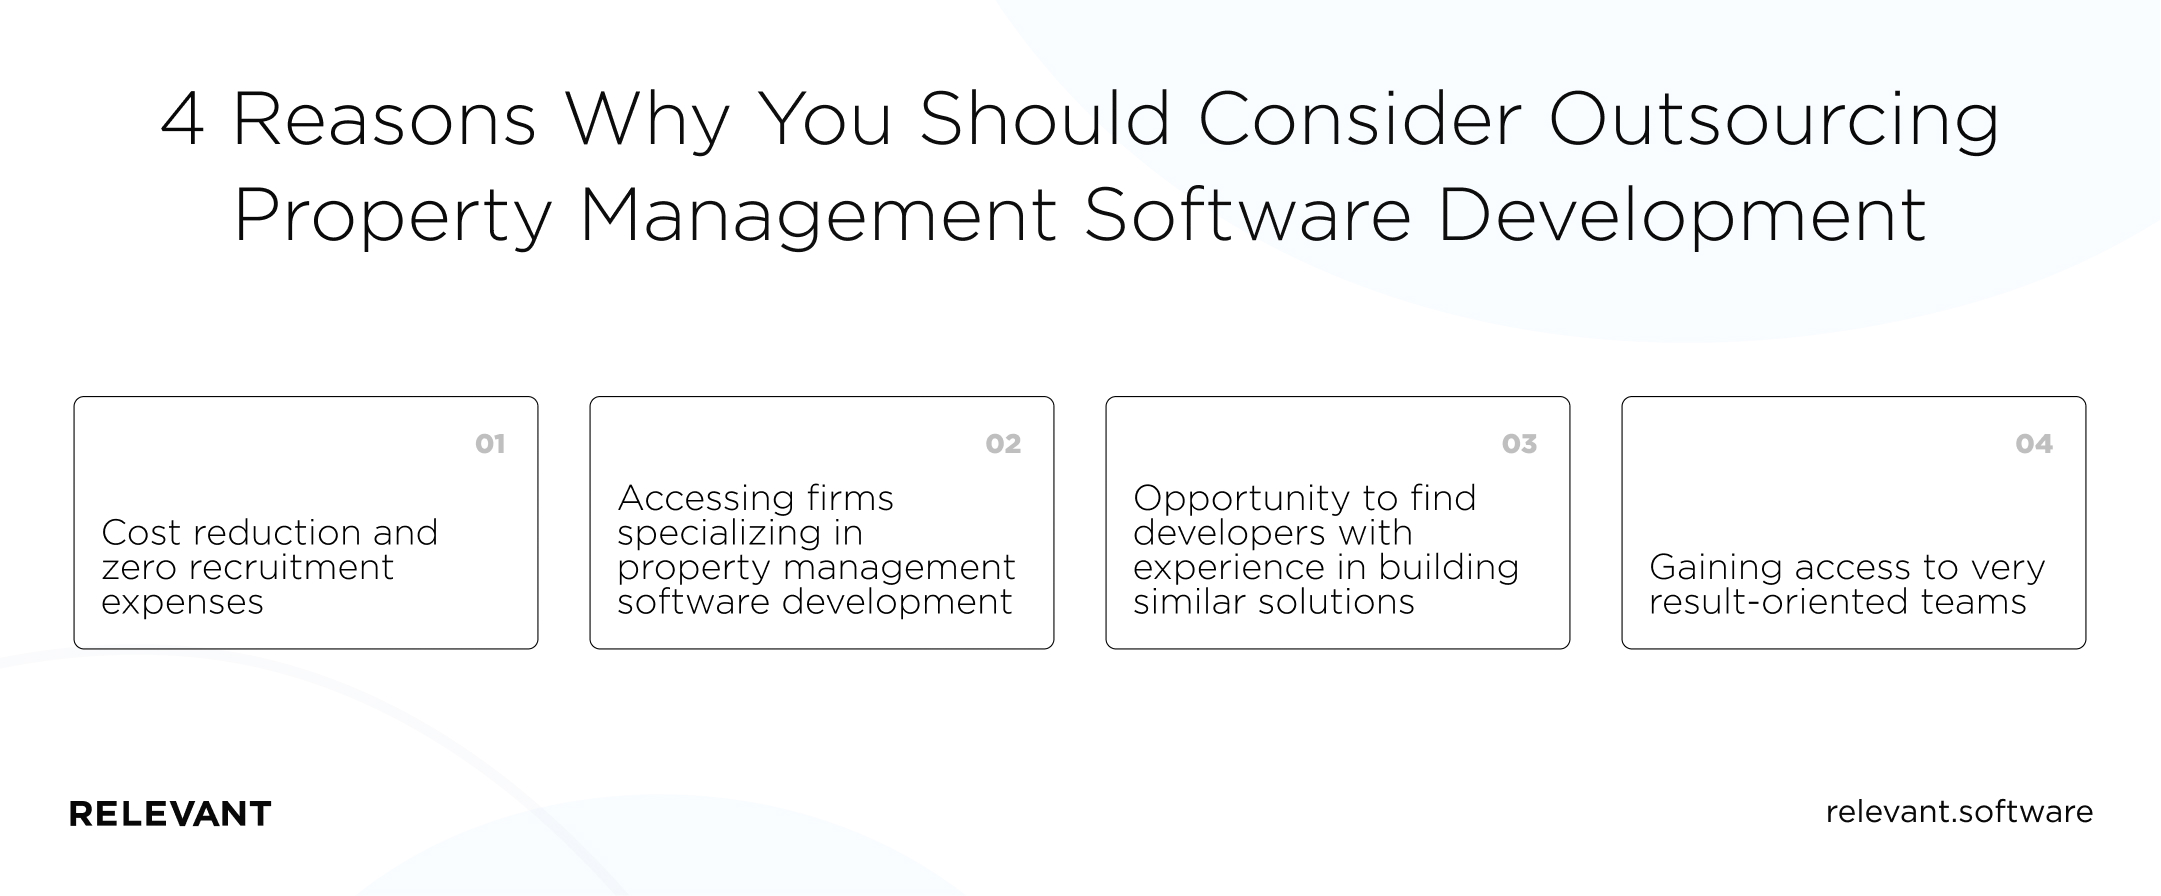  4 Reasons Why You Should Consider Outsourcing Property Management Software Development